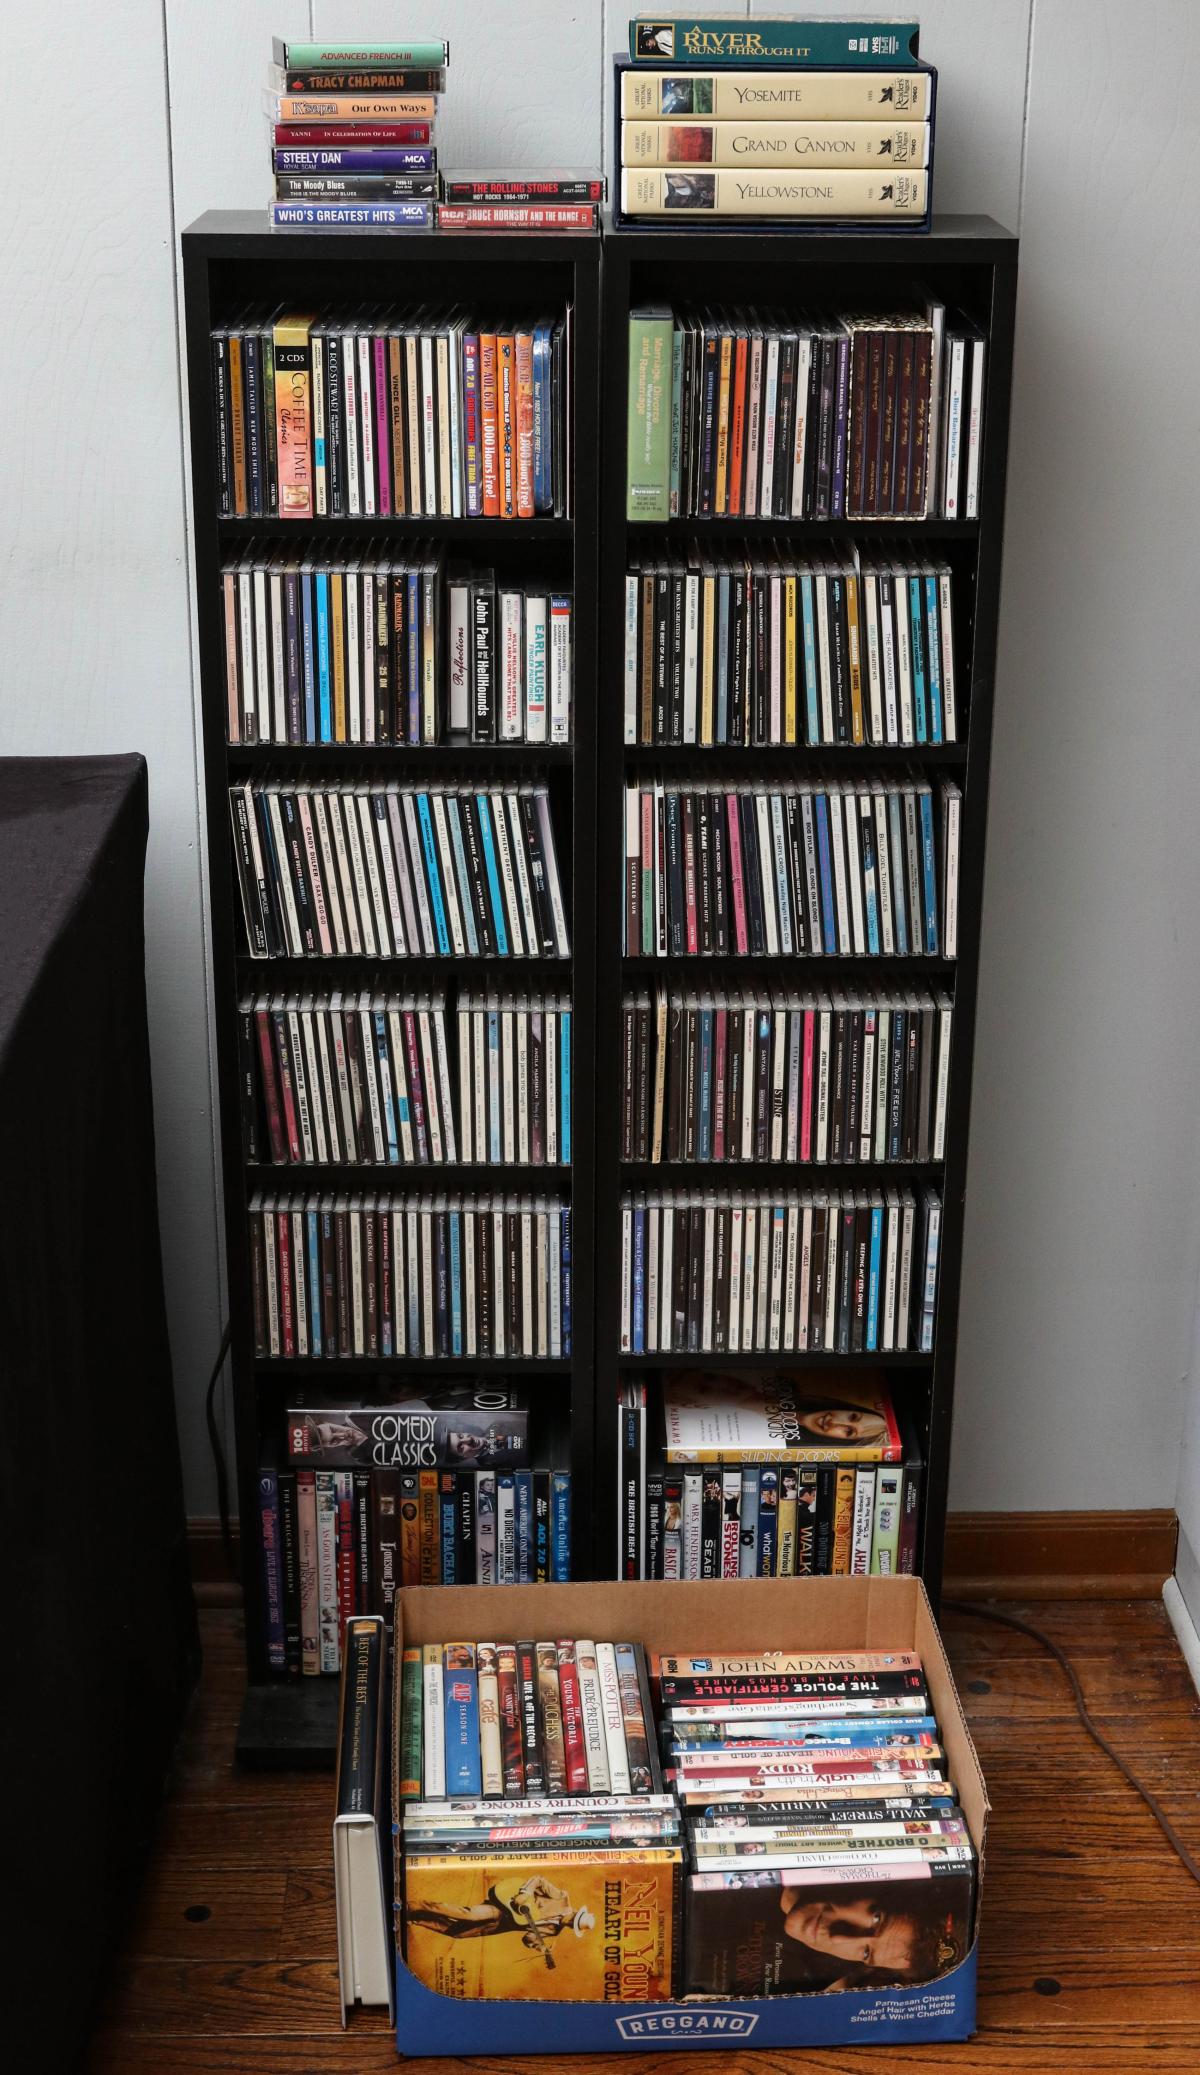 A LARGE COLLECTION OF CDs, DVDs WITH SHELVES